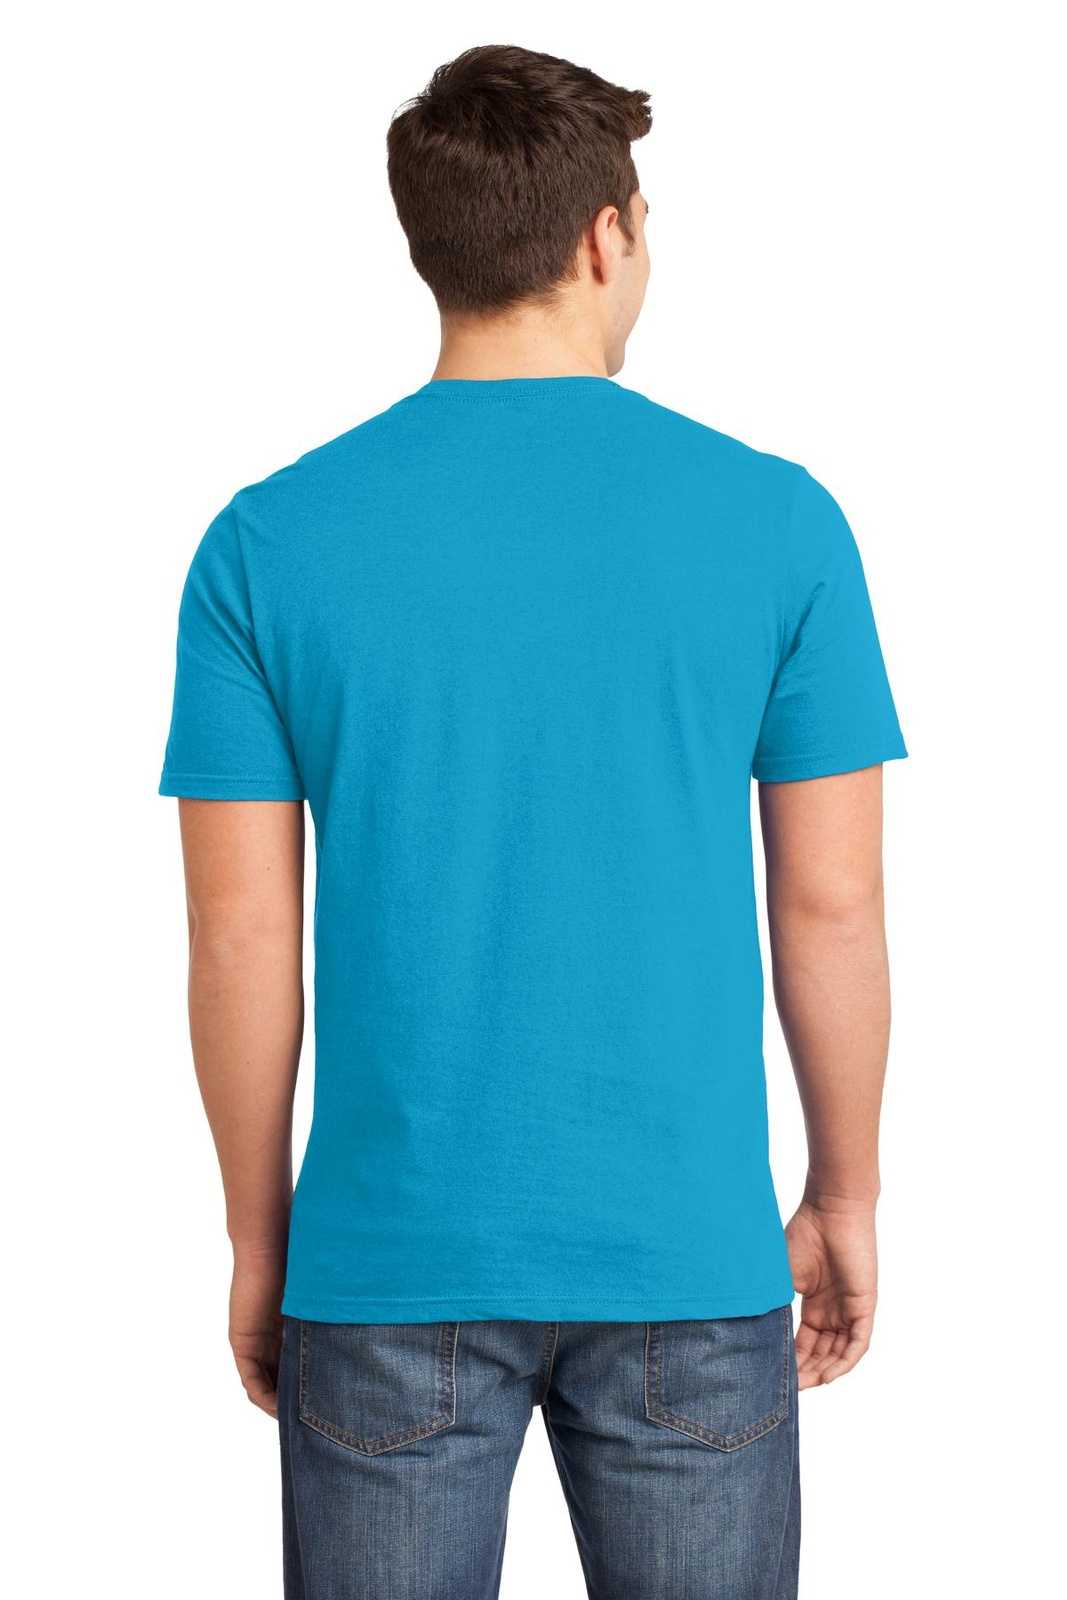 District DT6000 Very Important Tee - Light Turquoise - HIT a Double - 2